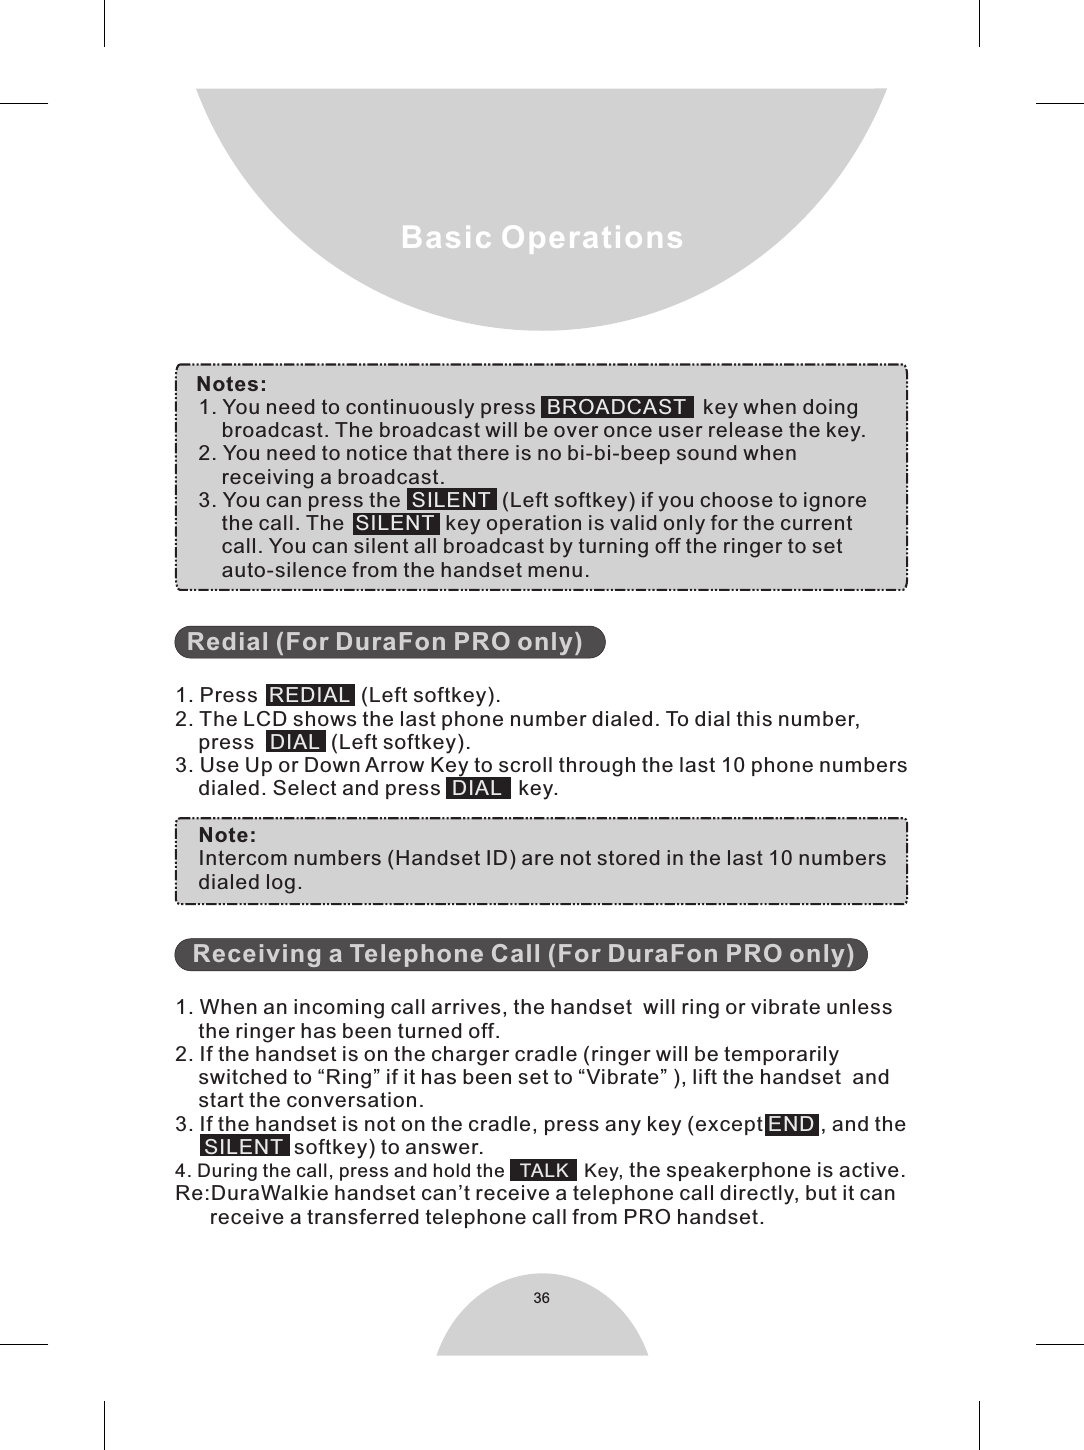 36Basic Operations    Notes:     1. You need to continuously press    key when doing        broadcast. The broadcast will be over once user release the key.    2. You need to notice that there is no bi-bi-beep sound when        receiving a broadcast.    3. You can press the   (Left softkey) if you choose to ignore        the call. The     key operation is valid only for the current        call. You can silent all broadcast by turning off the ringer to set        auto-silence from the handset menu.  1. Press     (Left softkey).2. The LCD shows the last phone number dialed. To dial this number,     press   (Left softkey).3. Use Up or Down Arrow Key to scroll through the last 10 phone numbers    dialed. Select and press     key.    Note:    Intercom numbers (Handset ID) are not stored in the last 10 numbers    dialed log.   1. When an incoming call arrives, the handset  will ring or vibrate unless    the ringer has been turned off.2. If the handset is on the charger cradle (ringer will be temporarily    switched to “Ring” if it has been set to “Vibrate” ), lift the handset  and    start the conversation.3. If the handset is not on the cradle, press any key (except  , and the        softkey) to answer.4. During the call, press and hold the      Key, the speakerphone is active.Re:DuraWalkie handset can’t receive a telephone call directly, but it can        receive a transferred telephone call from PRO handset.      BROADCASTSILENTSILENTREDIALDIAL  DIALENDSILENTTALK       Redial (For DuraFon PRO only)Receiving a Telephone Call (For DuraFon PRO only)